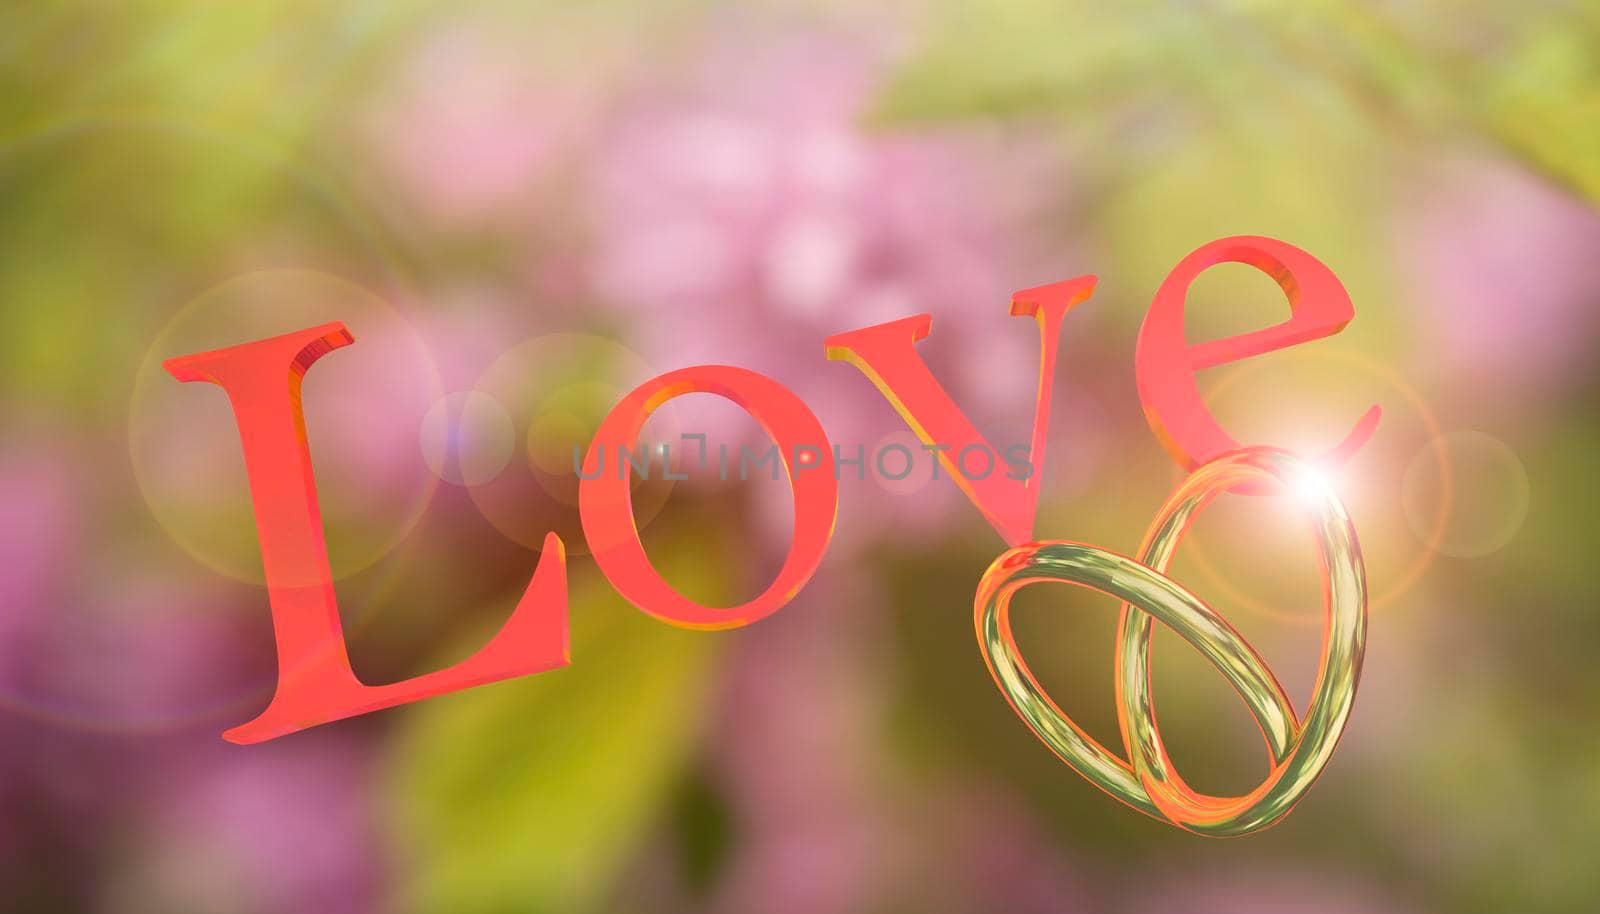 Abstract background with the text love on a blurry floral background. 3d image